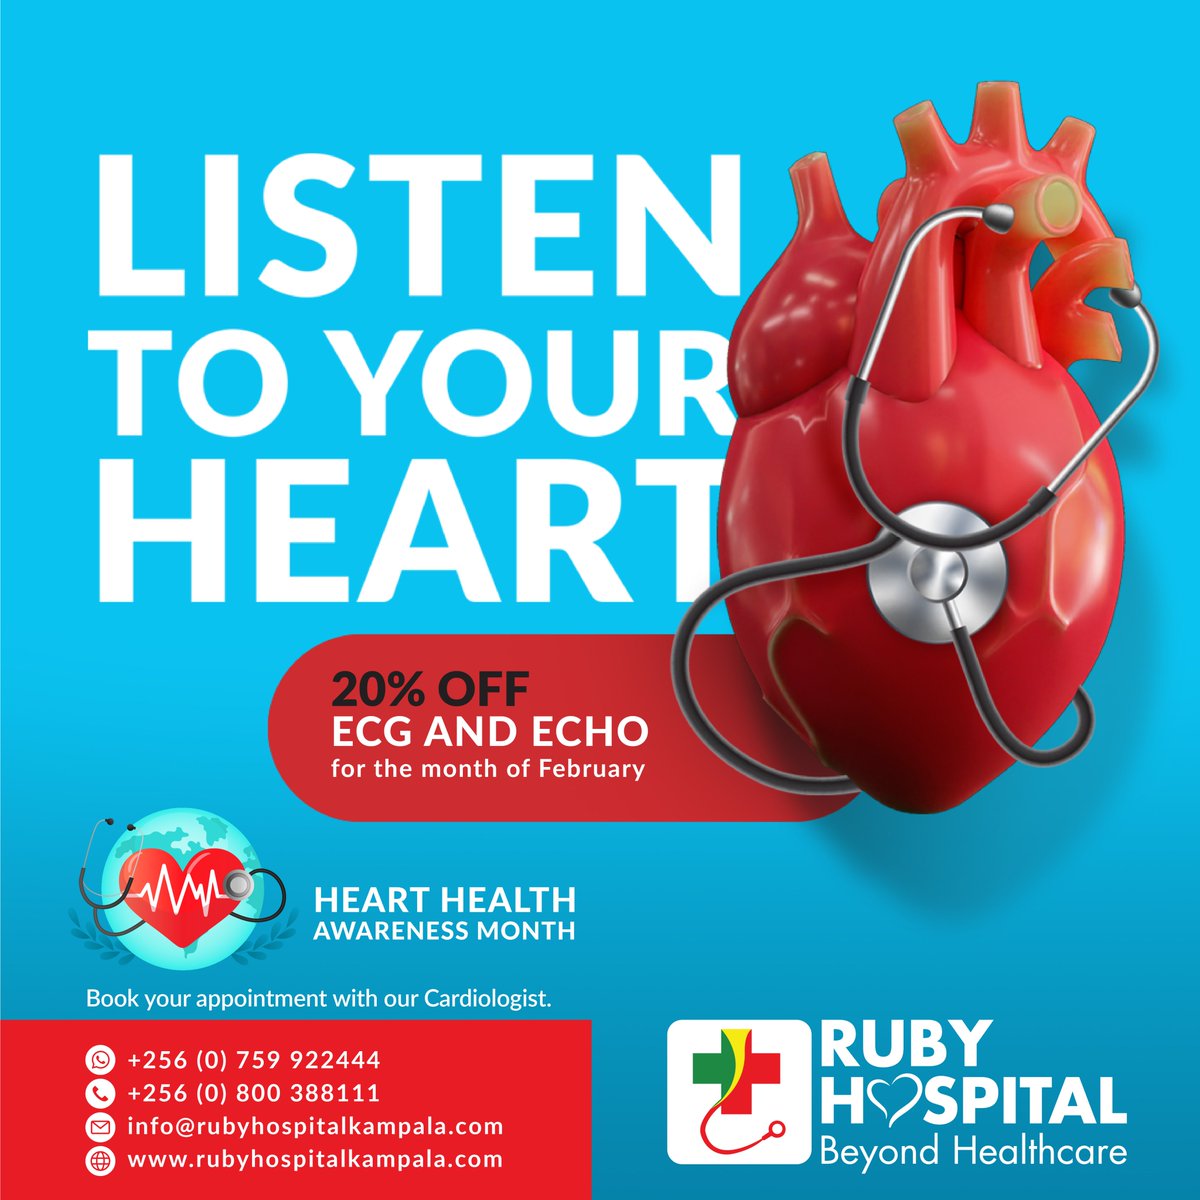 Unlock a healthier heart this Heart Health Awareness Month with Ruby Hospital’s compassionate care. ❤️ Take charge of your well-being, enjoy exclusive discounts on our heart health services. Your heart deserves the best! #HeartHealthAwarenessMonth